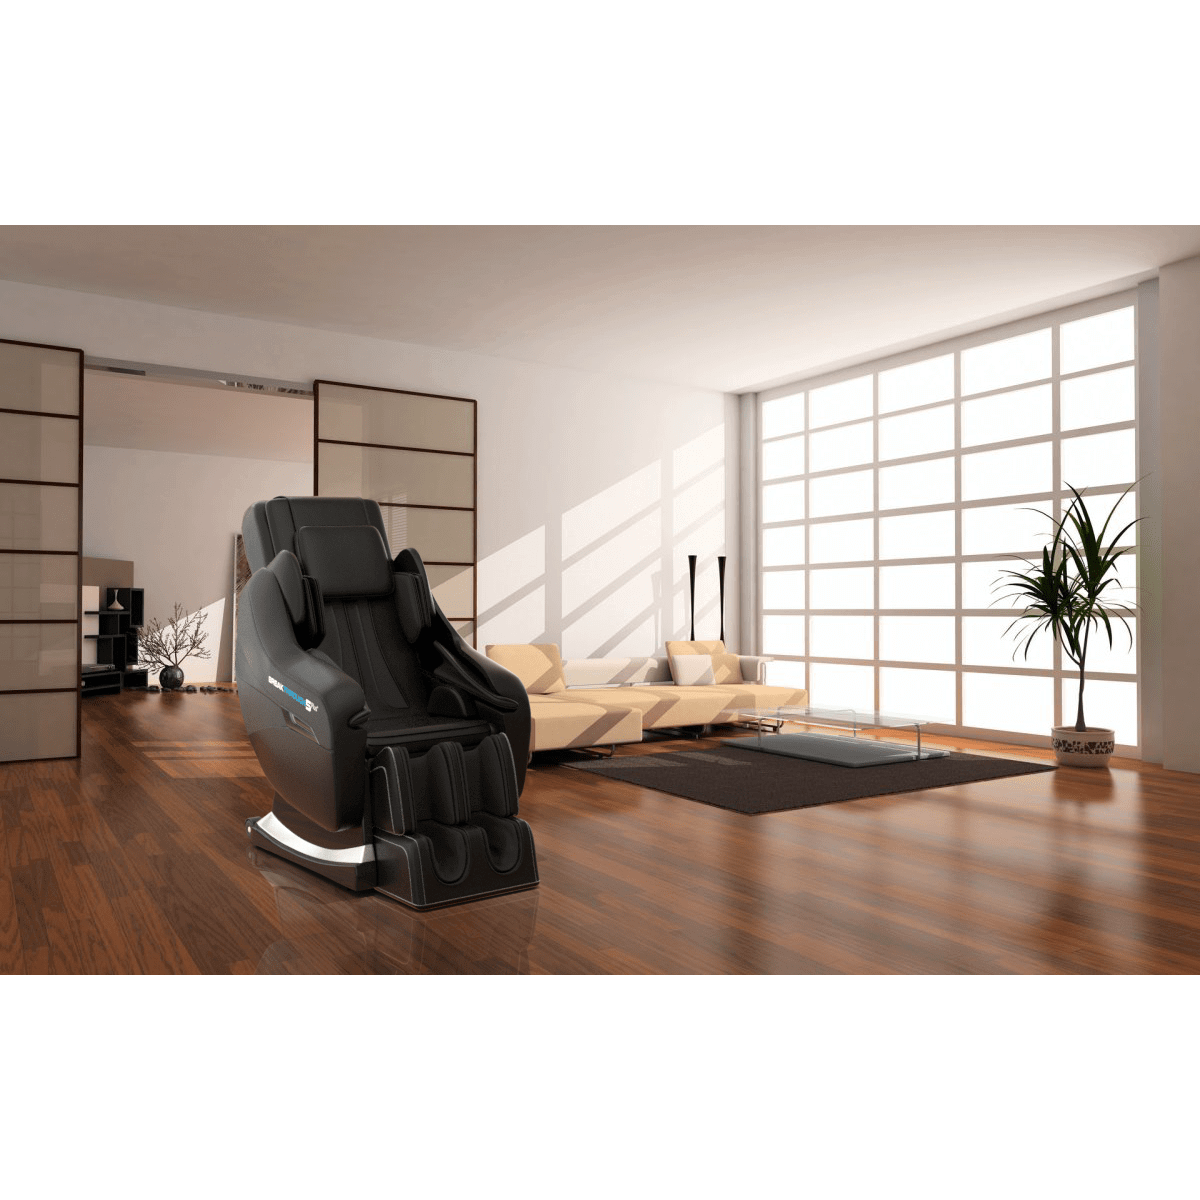 Medical Breakthrough 6 Massage Chair with Full Body Scan feature in sitting room feature